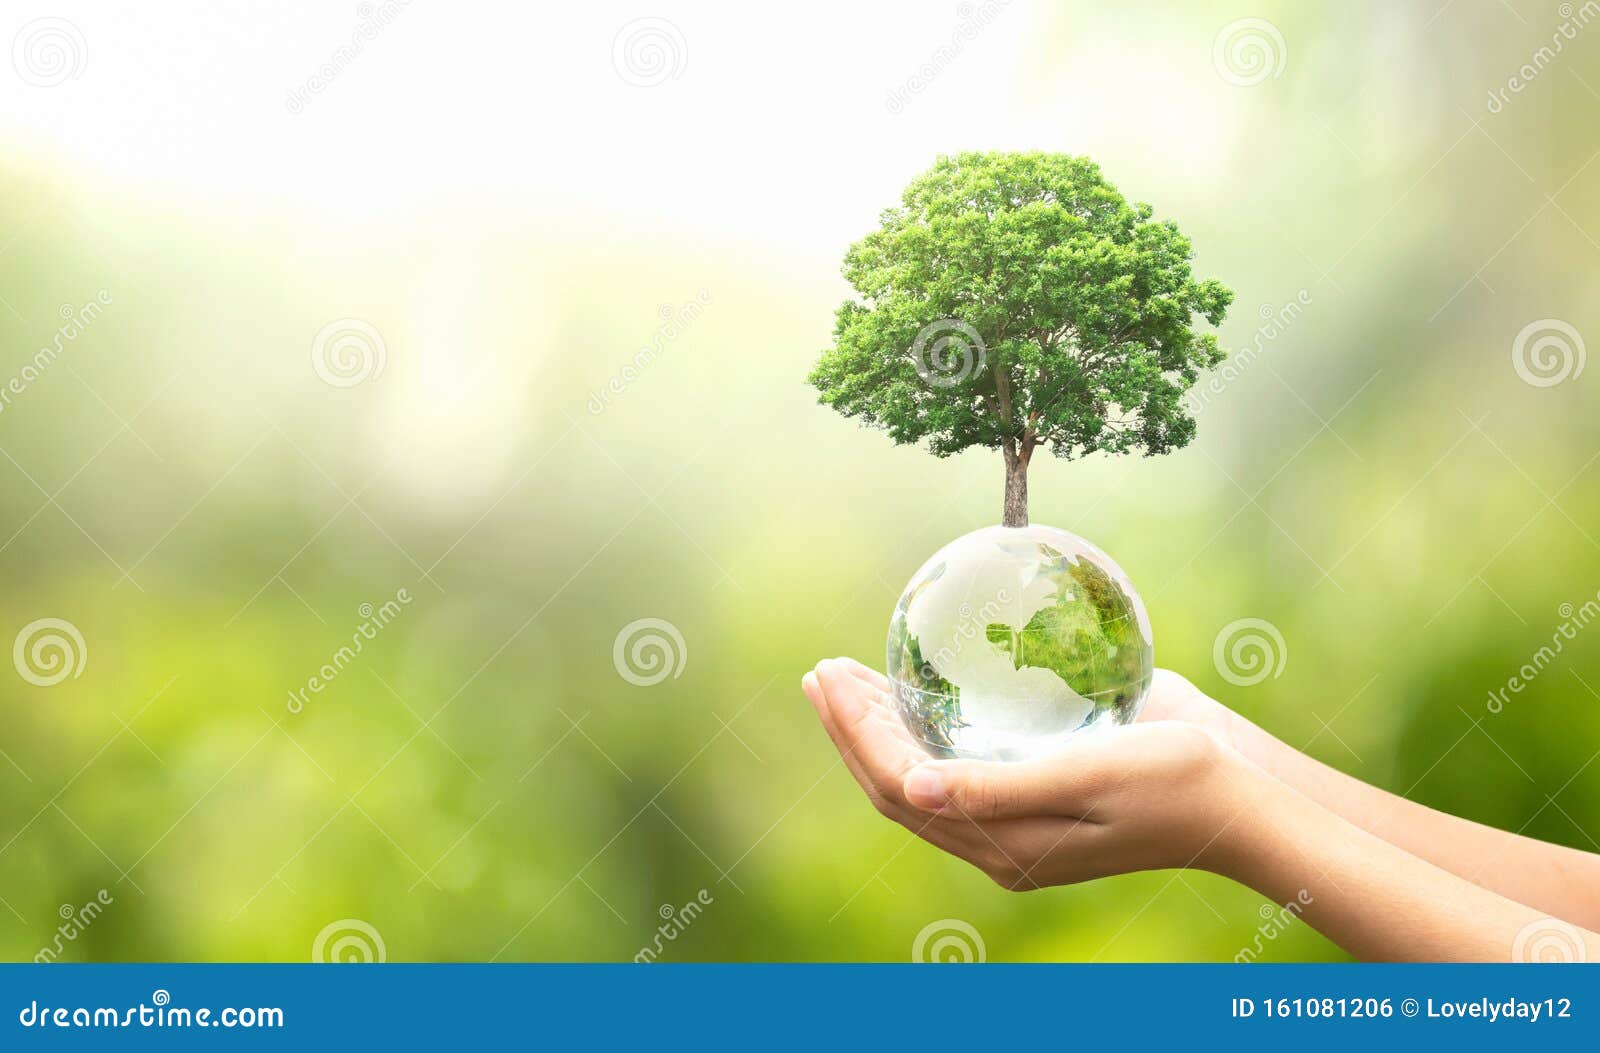 13,455,113 Green Nature Photos Free & Royalty-Free Stock Dreamstime